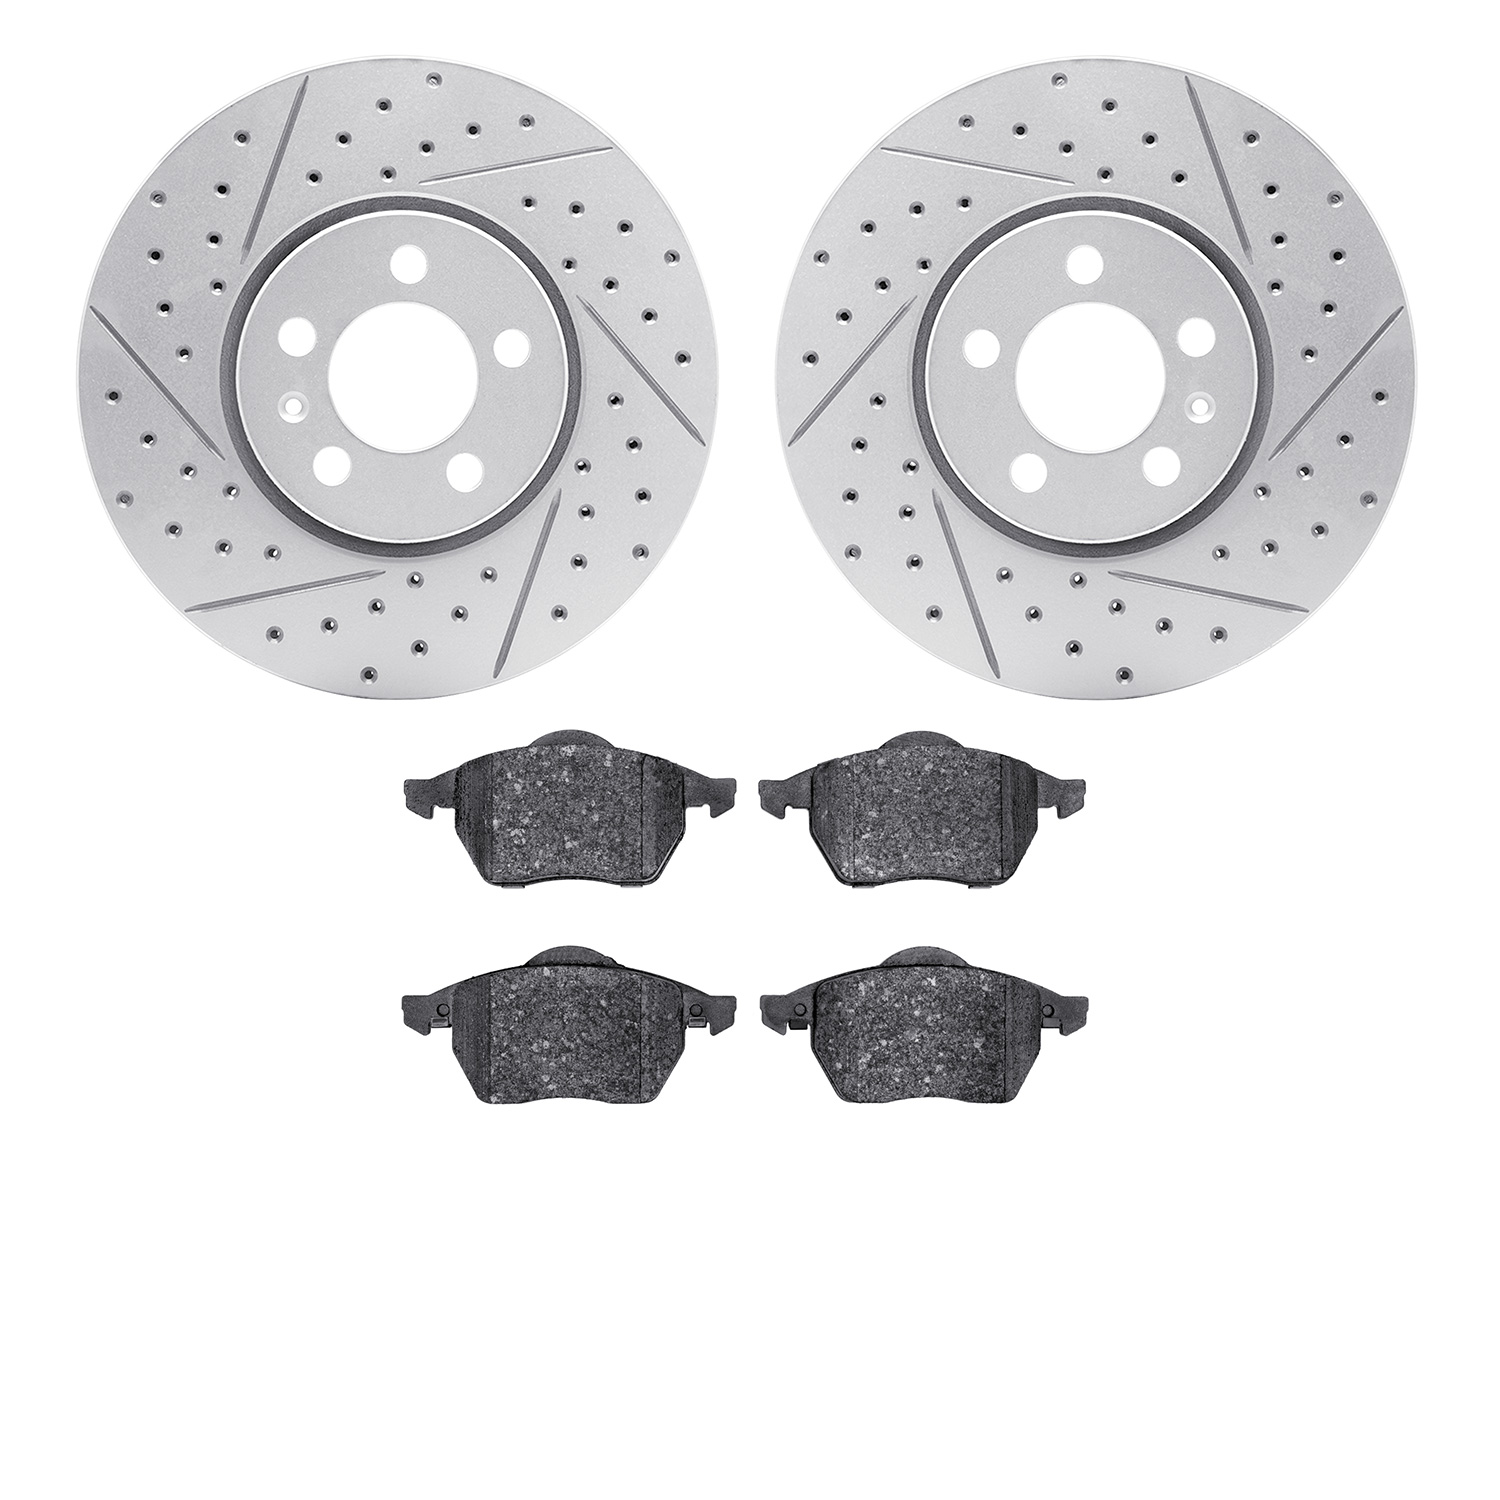 2502-74020 Geoperformance Drilled/Slotted Rotors w/5000 Advanced Brake Pads Kit, 1998-1998 Audi/Volkswagen, Position: Front